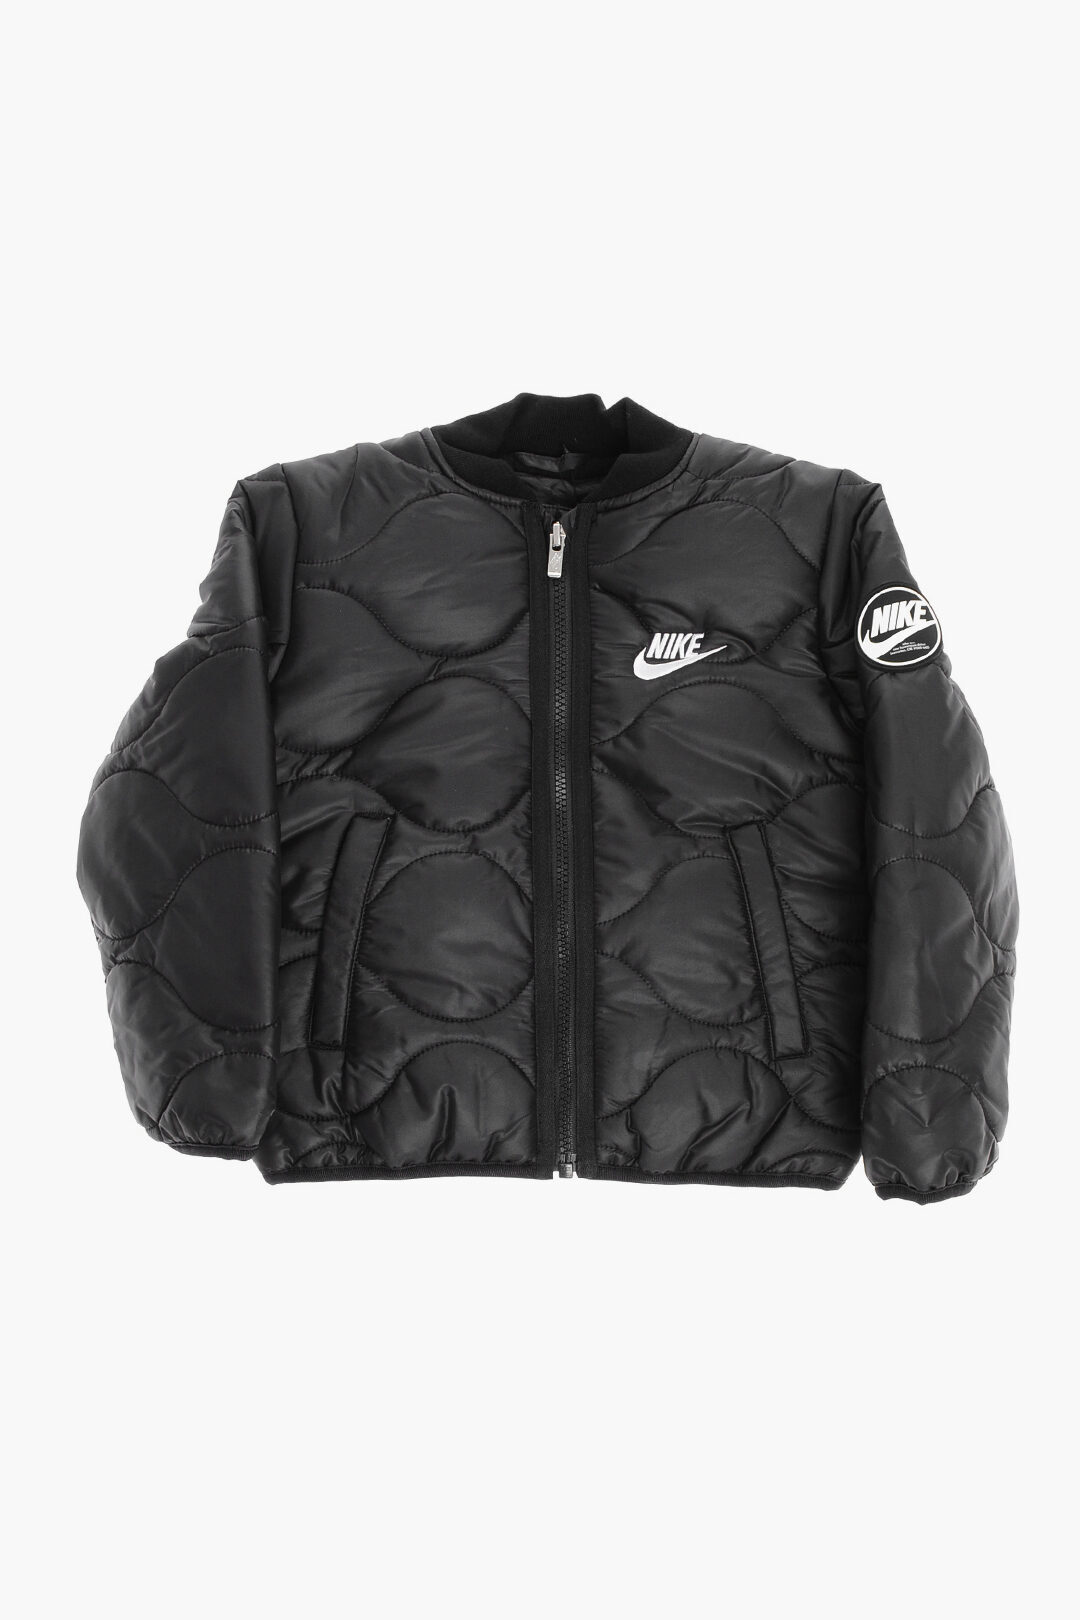 NIKE KIDS ナイキ ジャケット 86K975-023 ボーイズ NIKE QUILTED BOMBER 【関税・送料無料】【ラッピン..